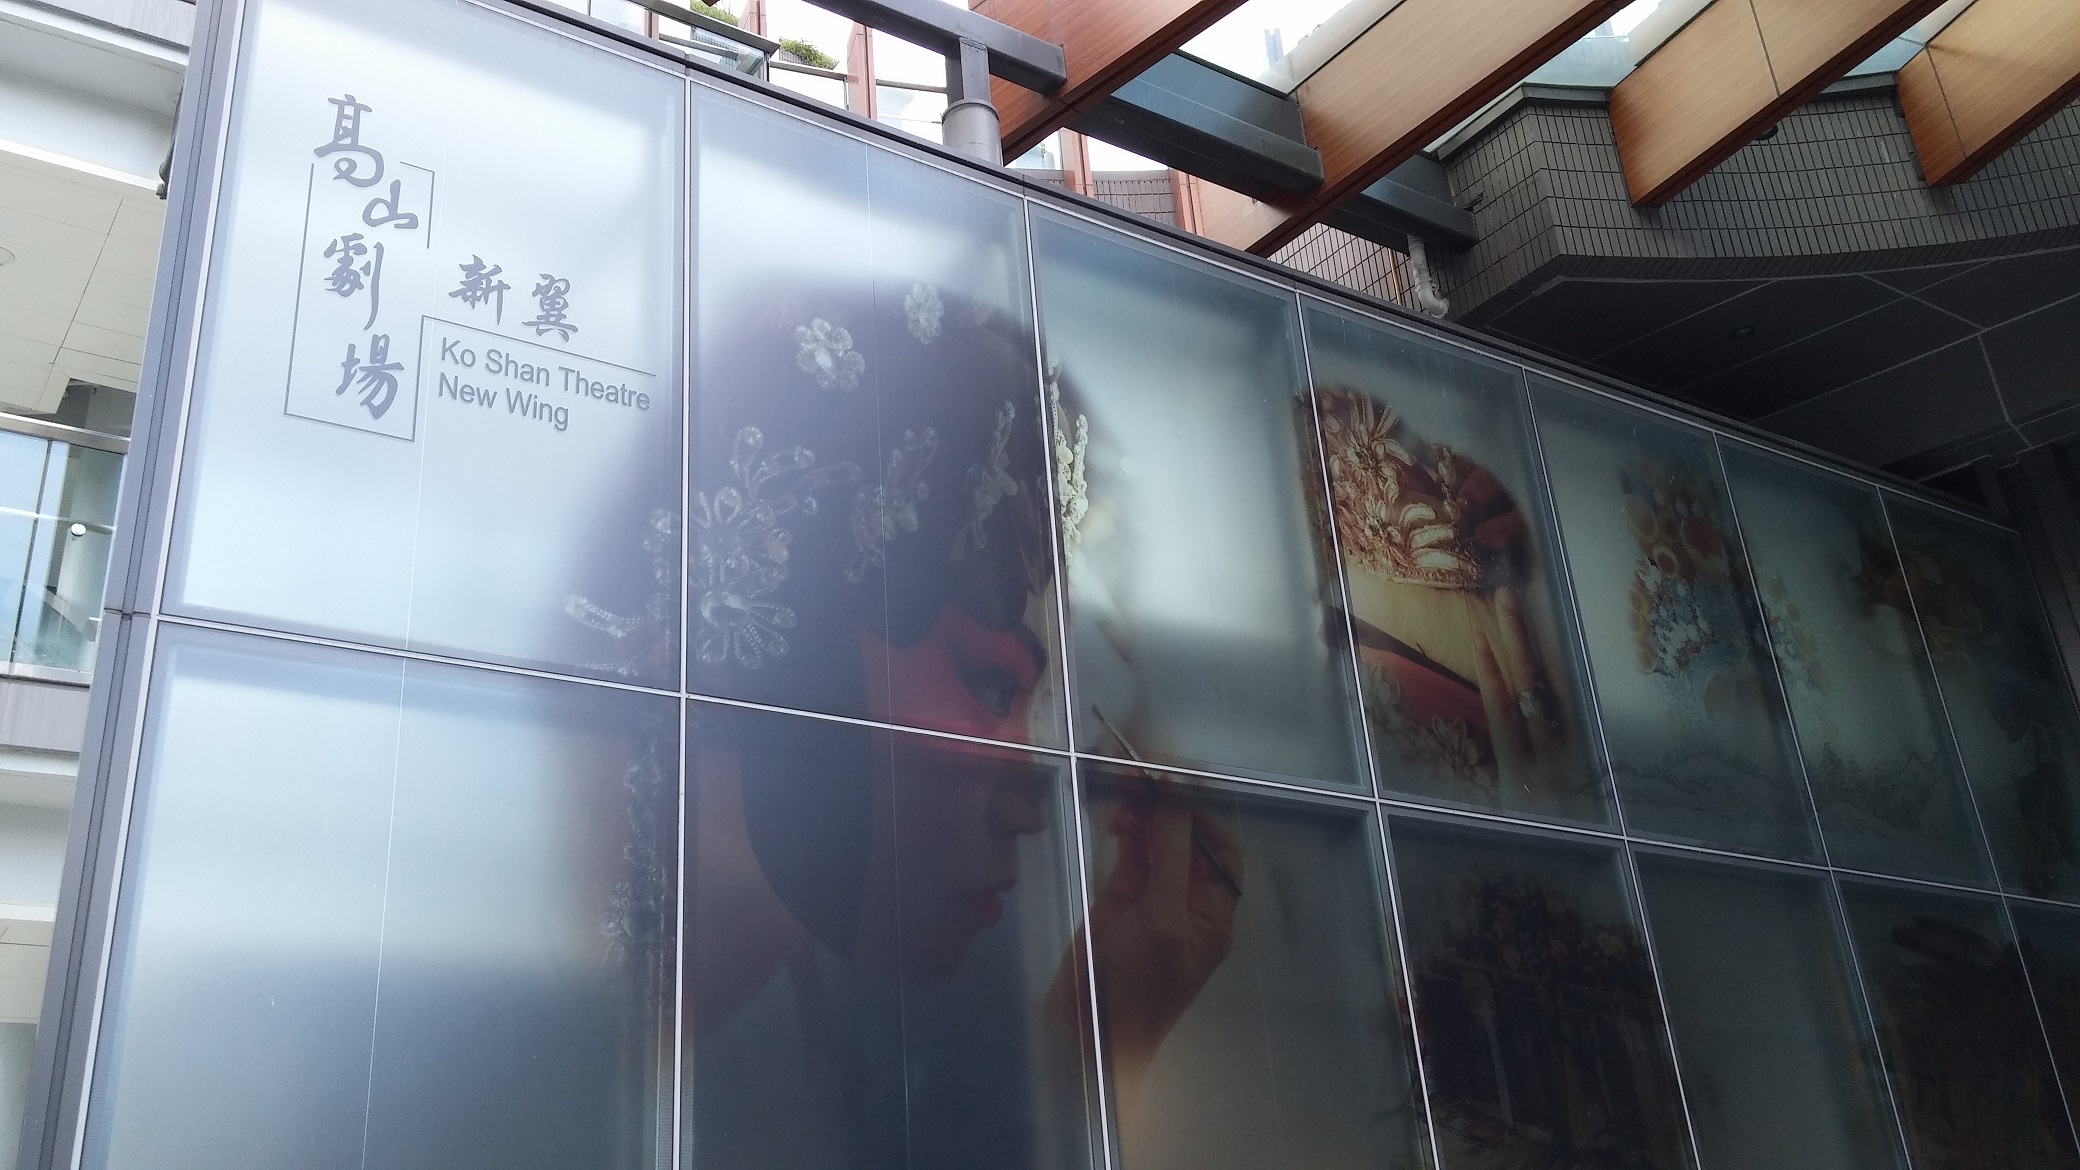 Cantonese Opera Education and Information Center is at Ko Shan Theatre